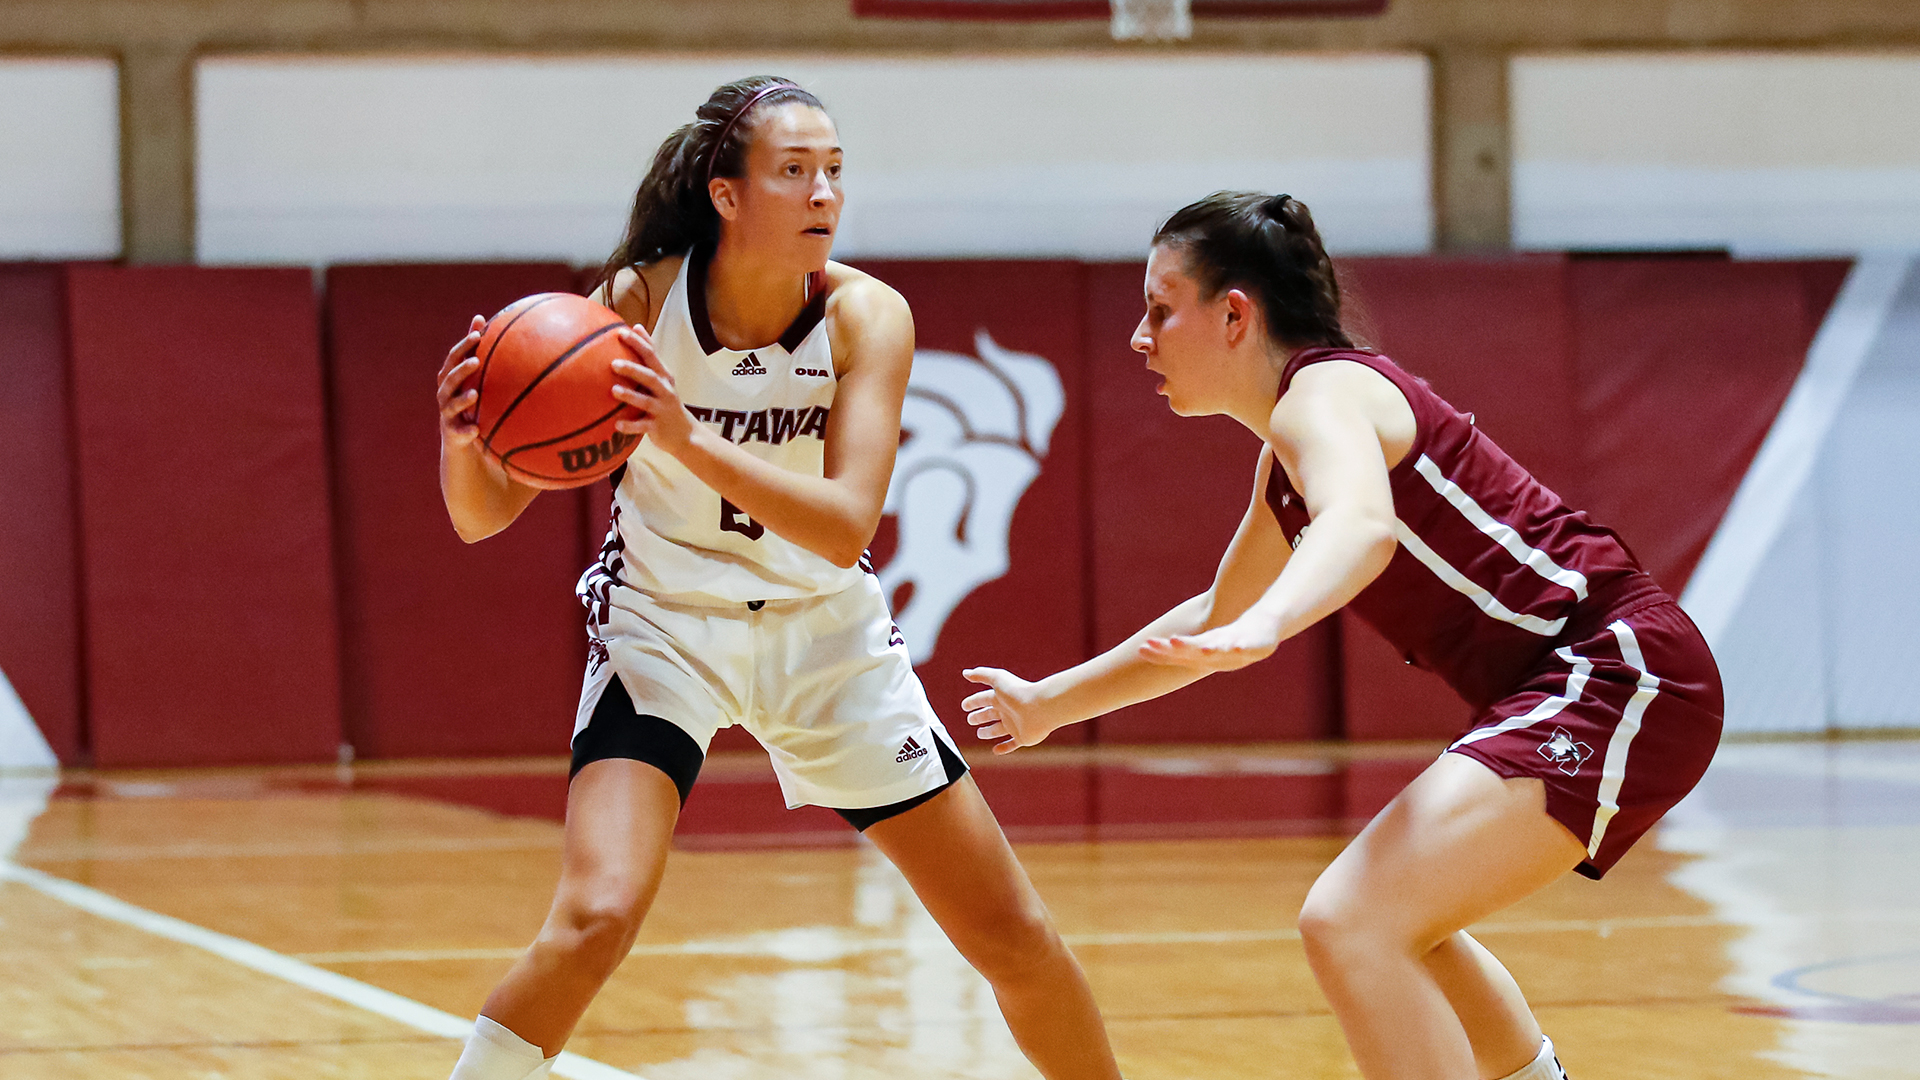 RECAP: #8 Gee-Gees power to big road win over Thunderwolves